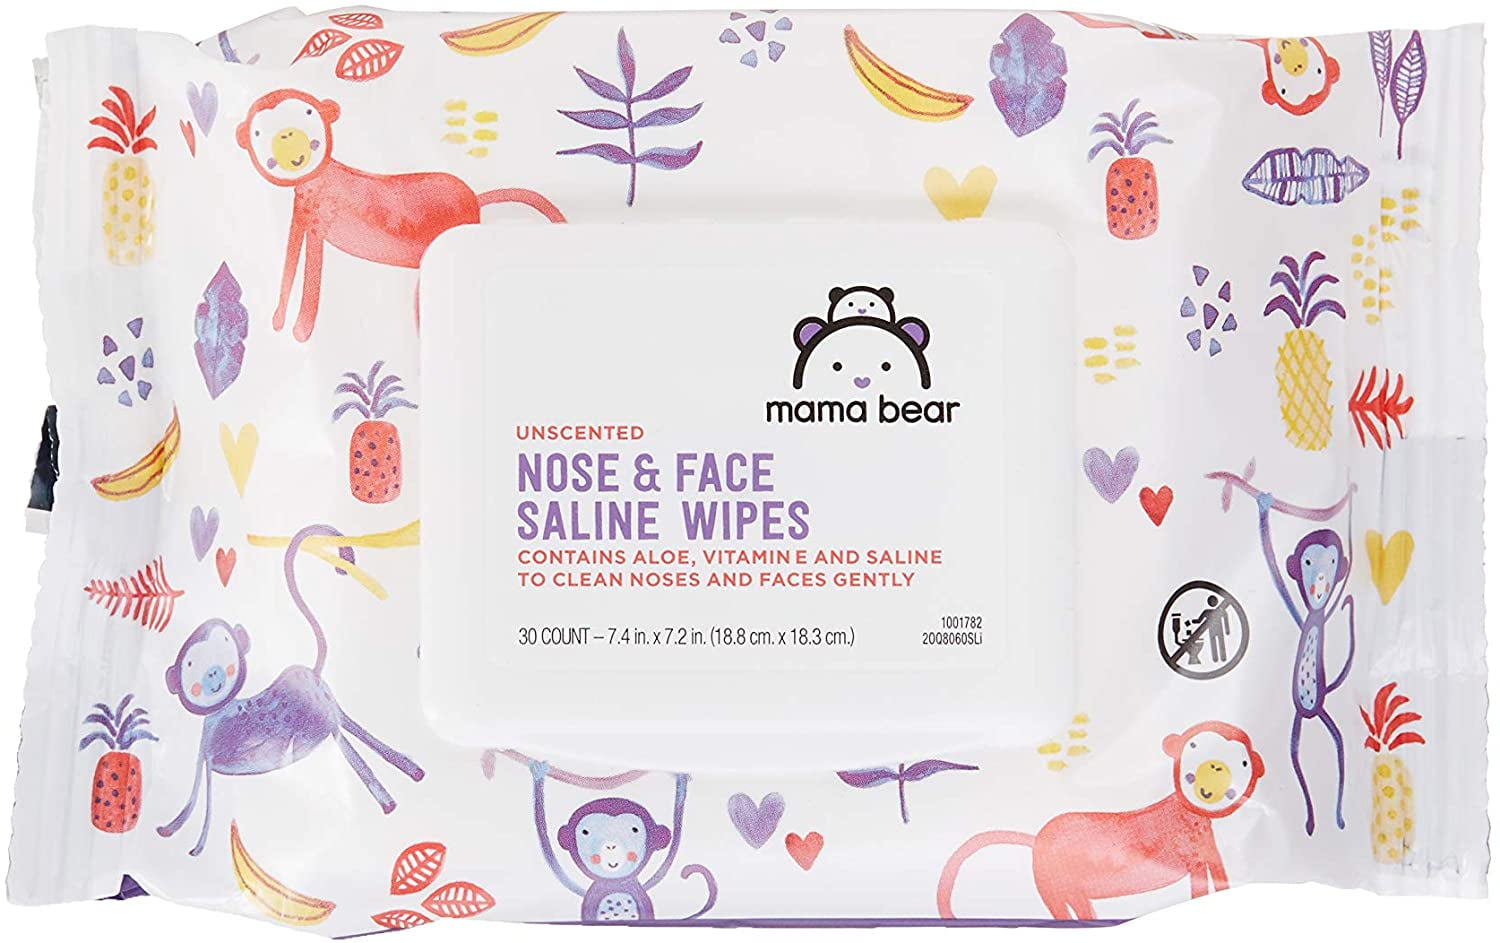 Baby Wipes, Momcozy Nose Saline Baby Wipes, Made Only With Natural Saline,  No Additives, 100% Biodegradable, Unscented & Hypoallergenic for Sensitive